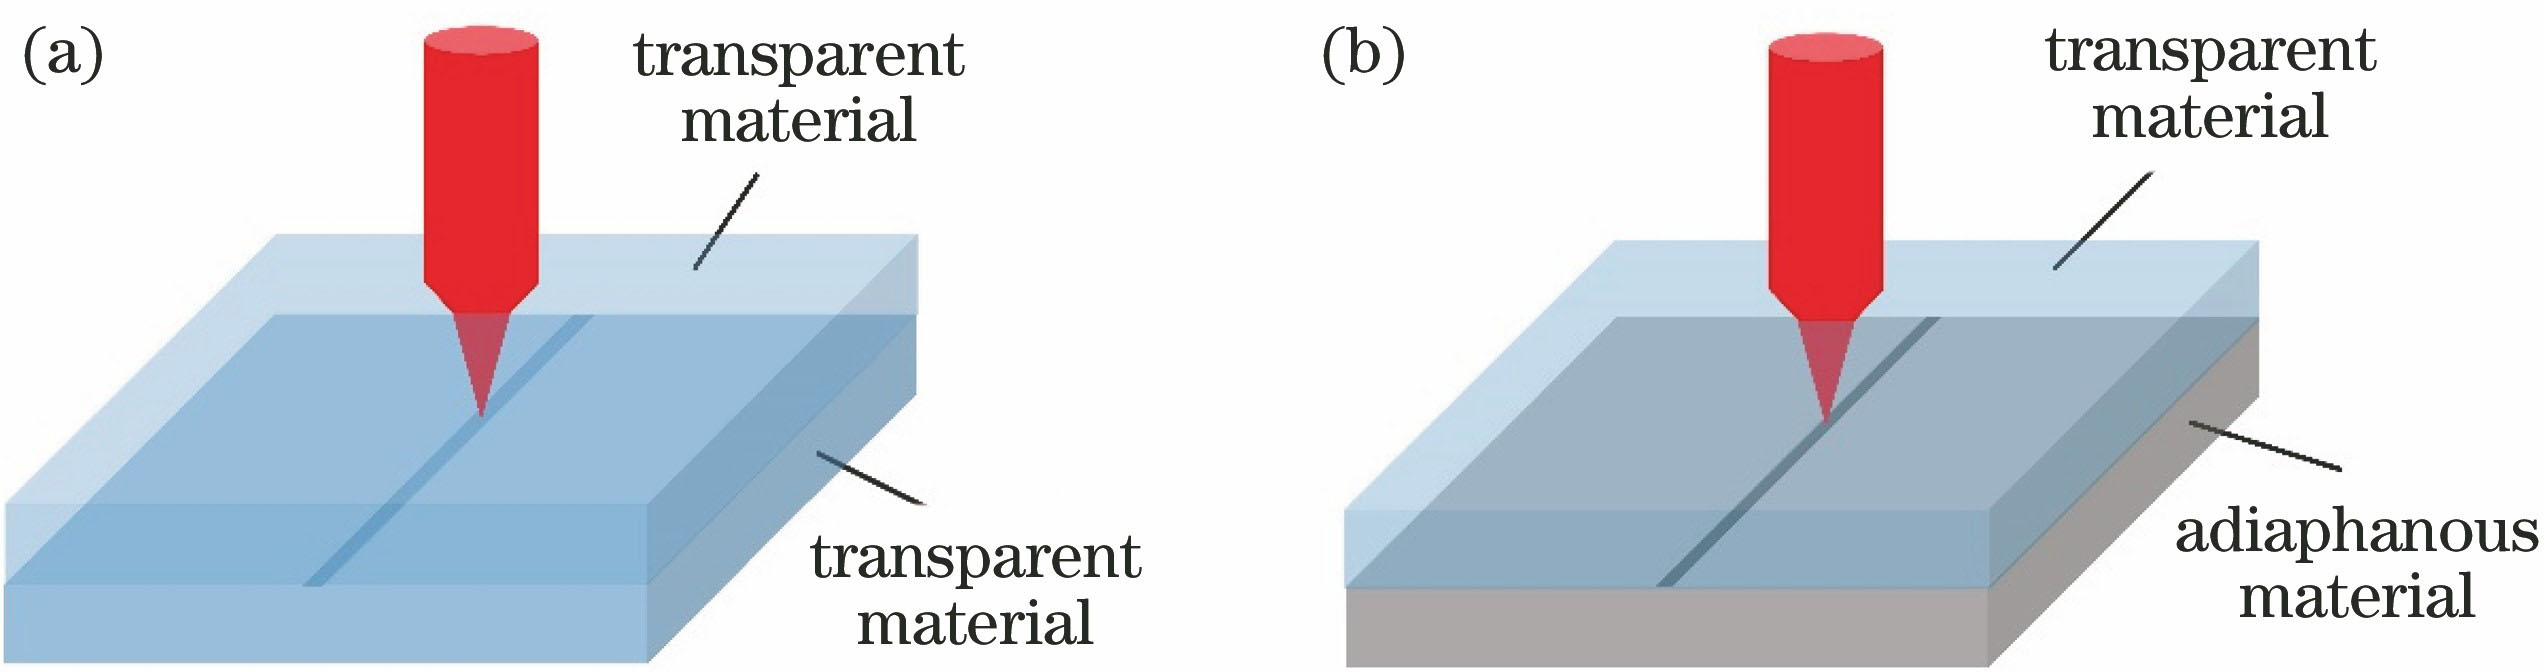 Schematic diagram of ultrashort pulsed laser welding. (a) Welding of fully transparent materials; (b) welding of partial transparent materials